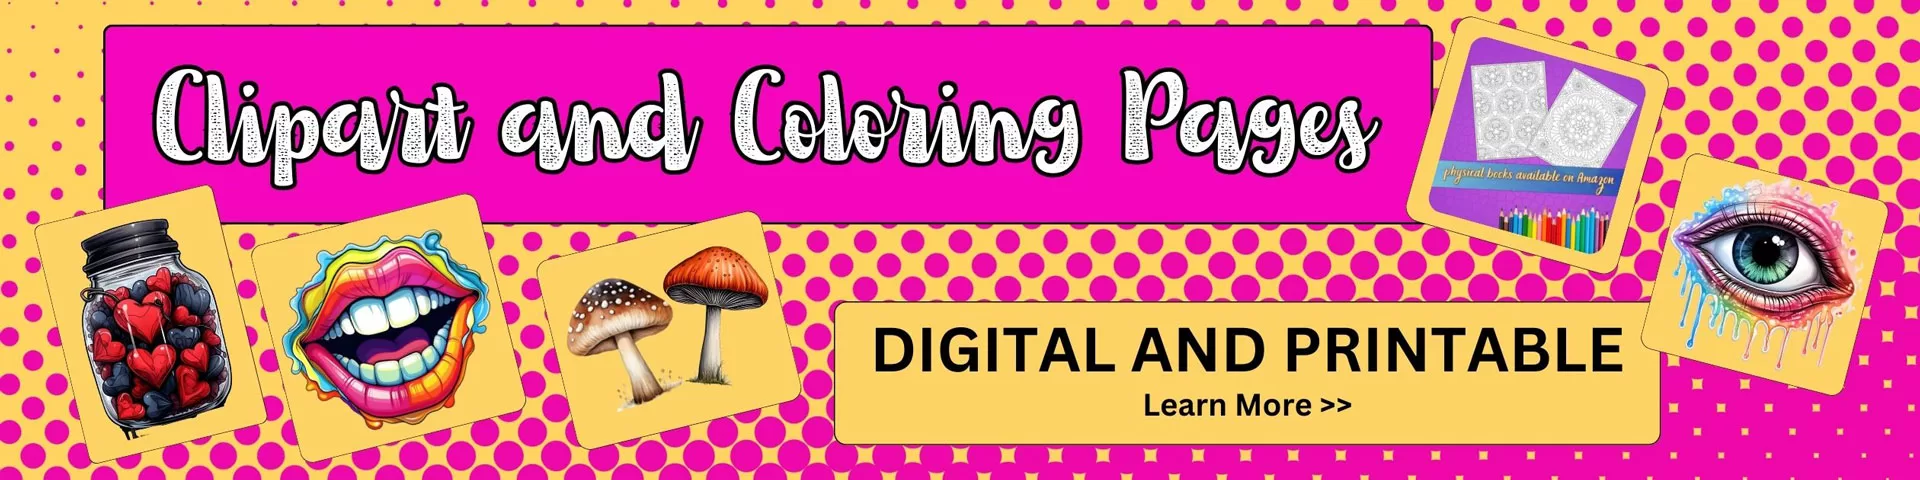 bright pink and yellow web site banner for lori greenberg digital downloads and printable clipart on Etsy